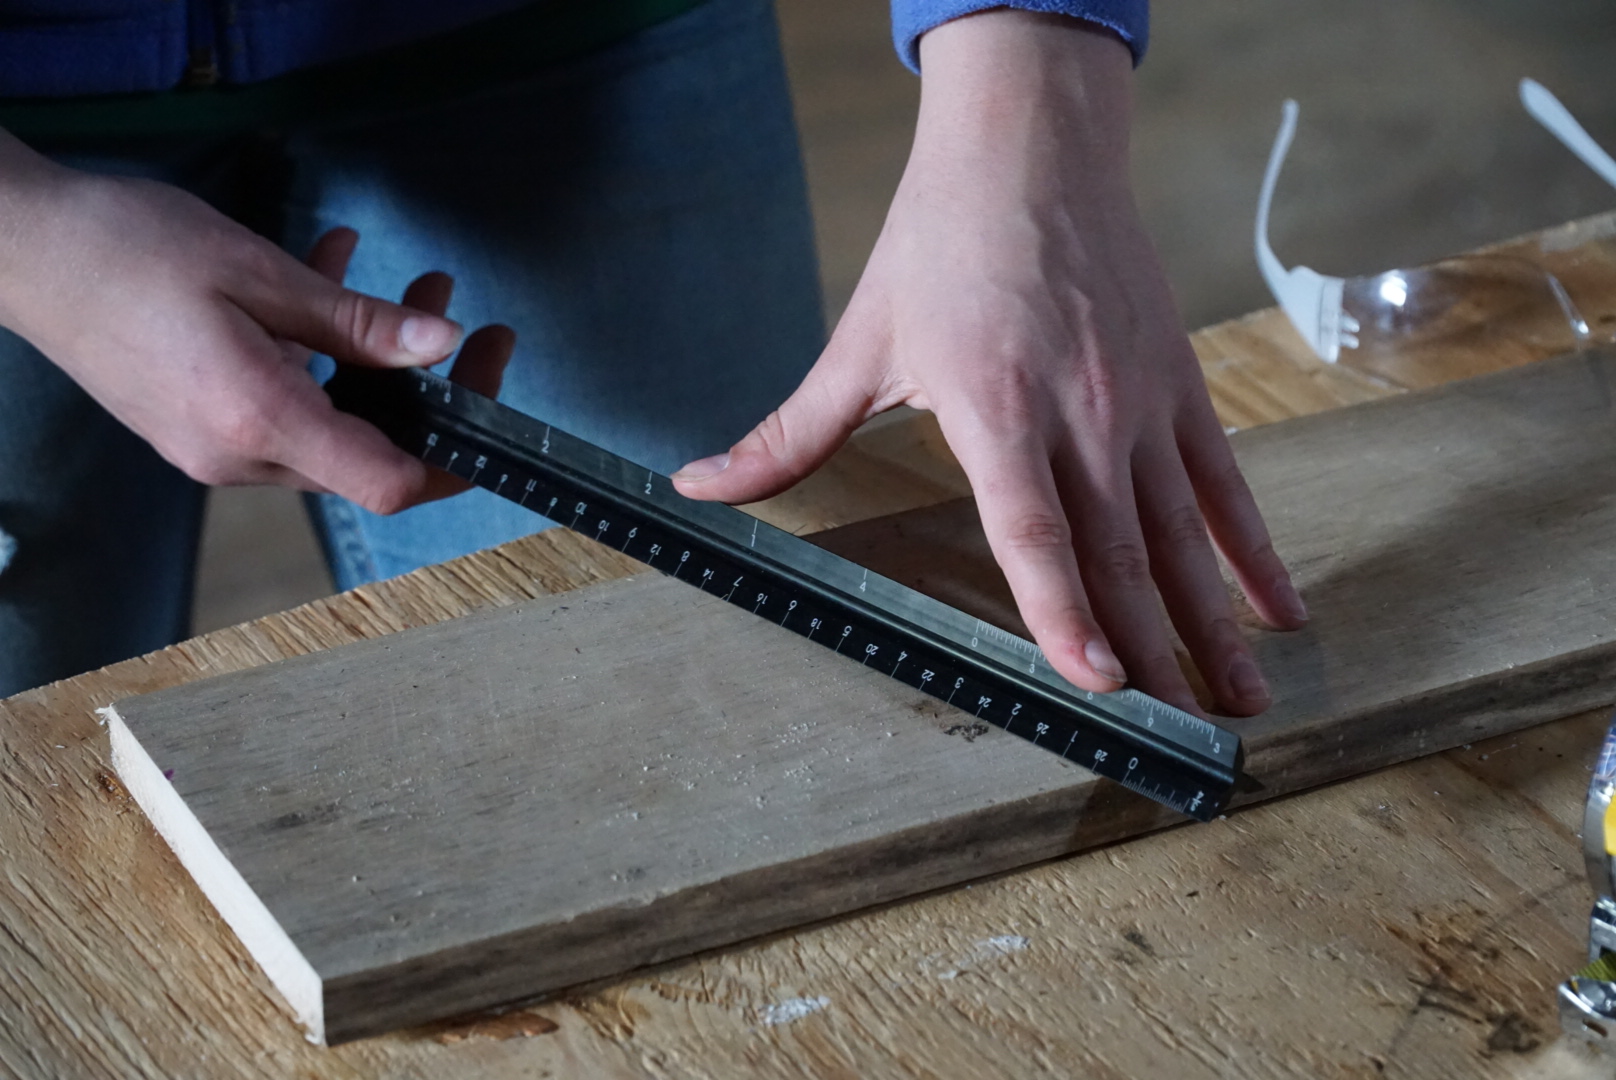 An image of a person using a ruler to make a measurement on a piece of wood.